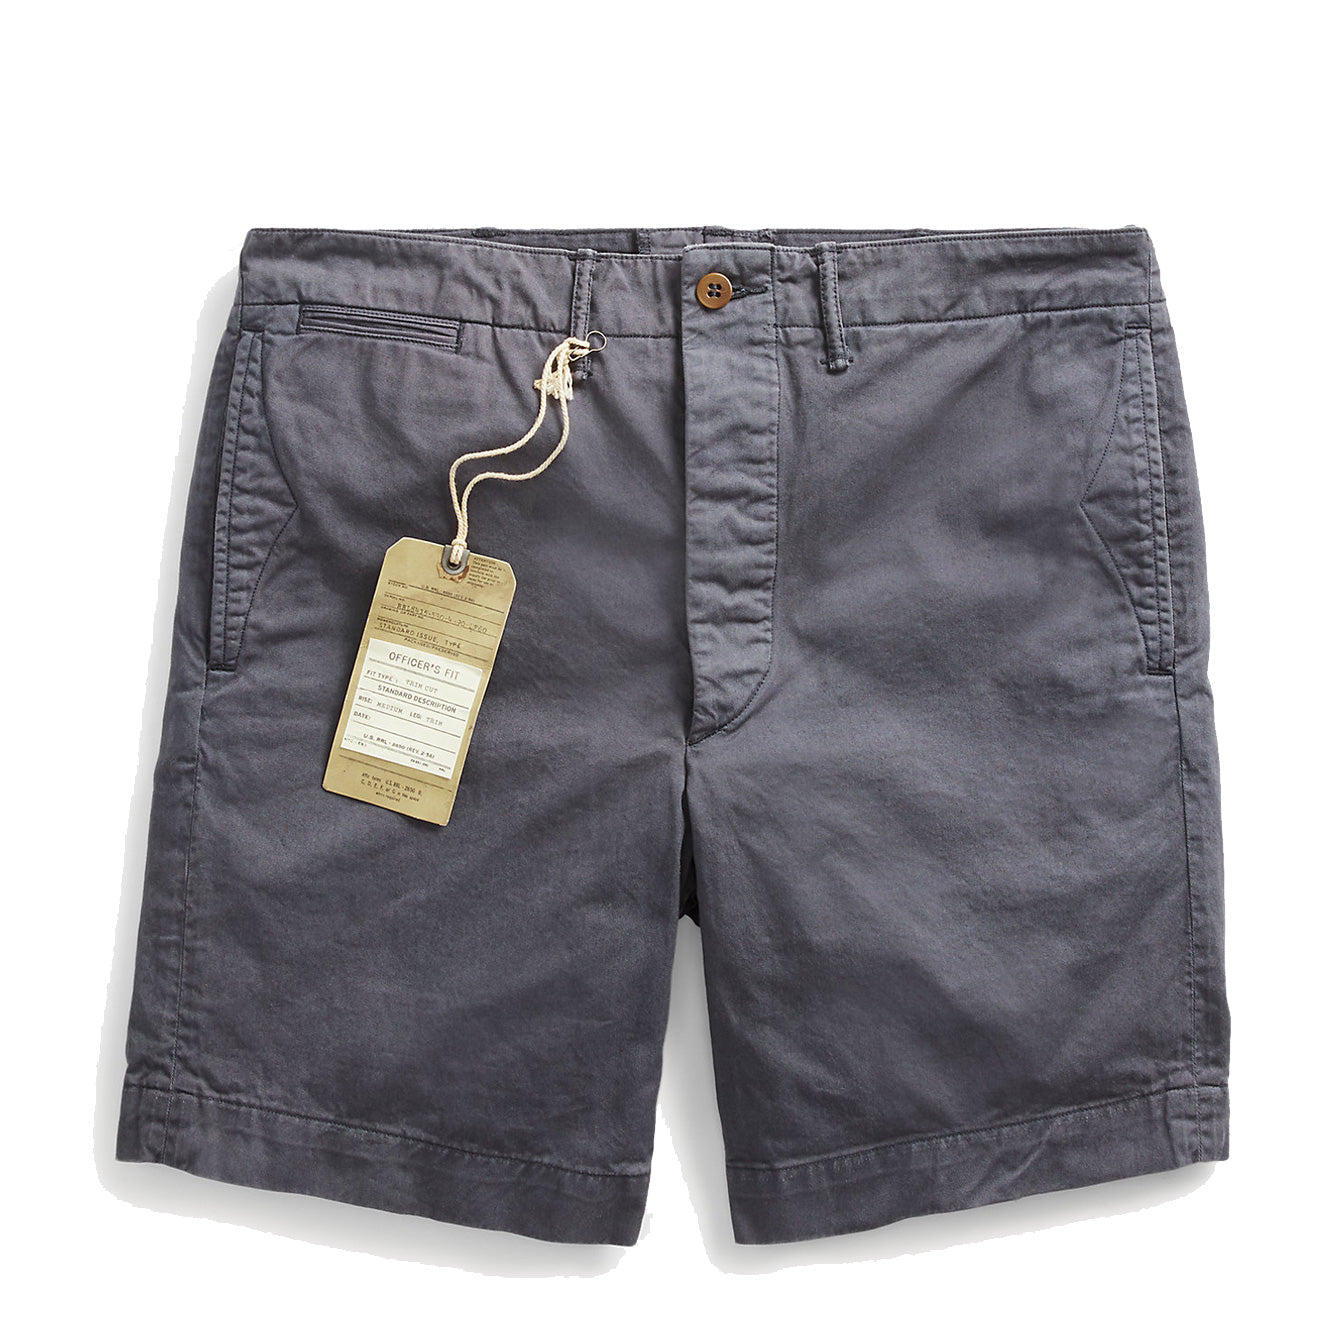 RRL by Ralph Lauren Garment-Dyed Chino Short Navy | The Sporting Lodge